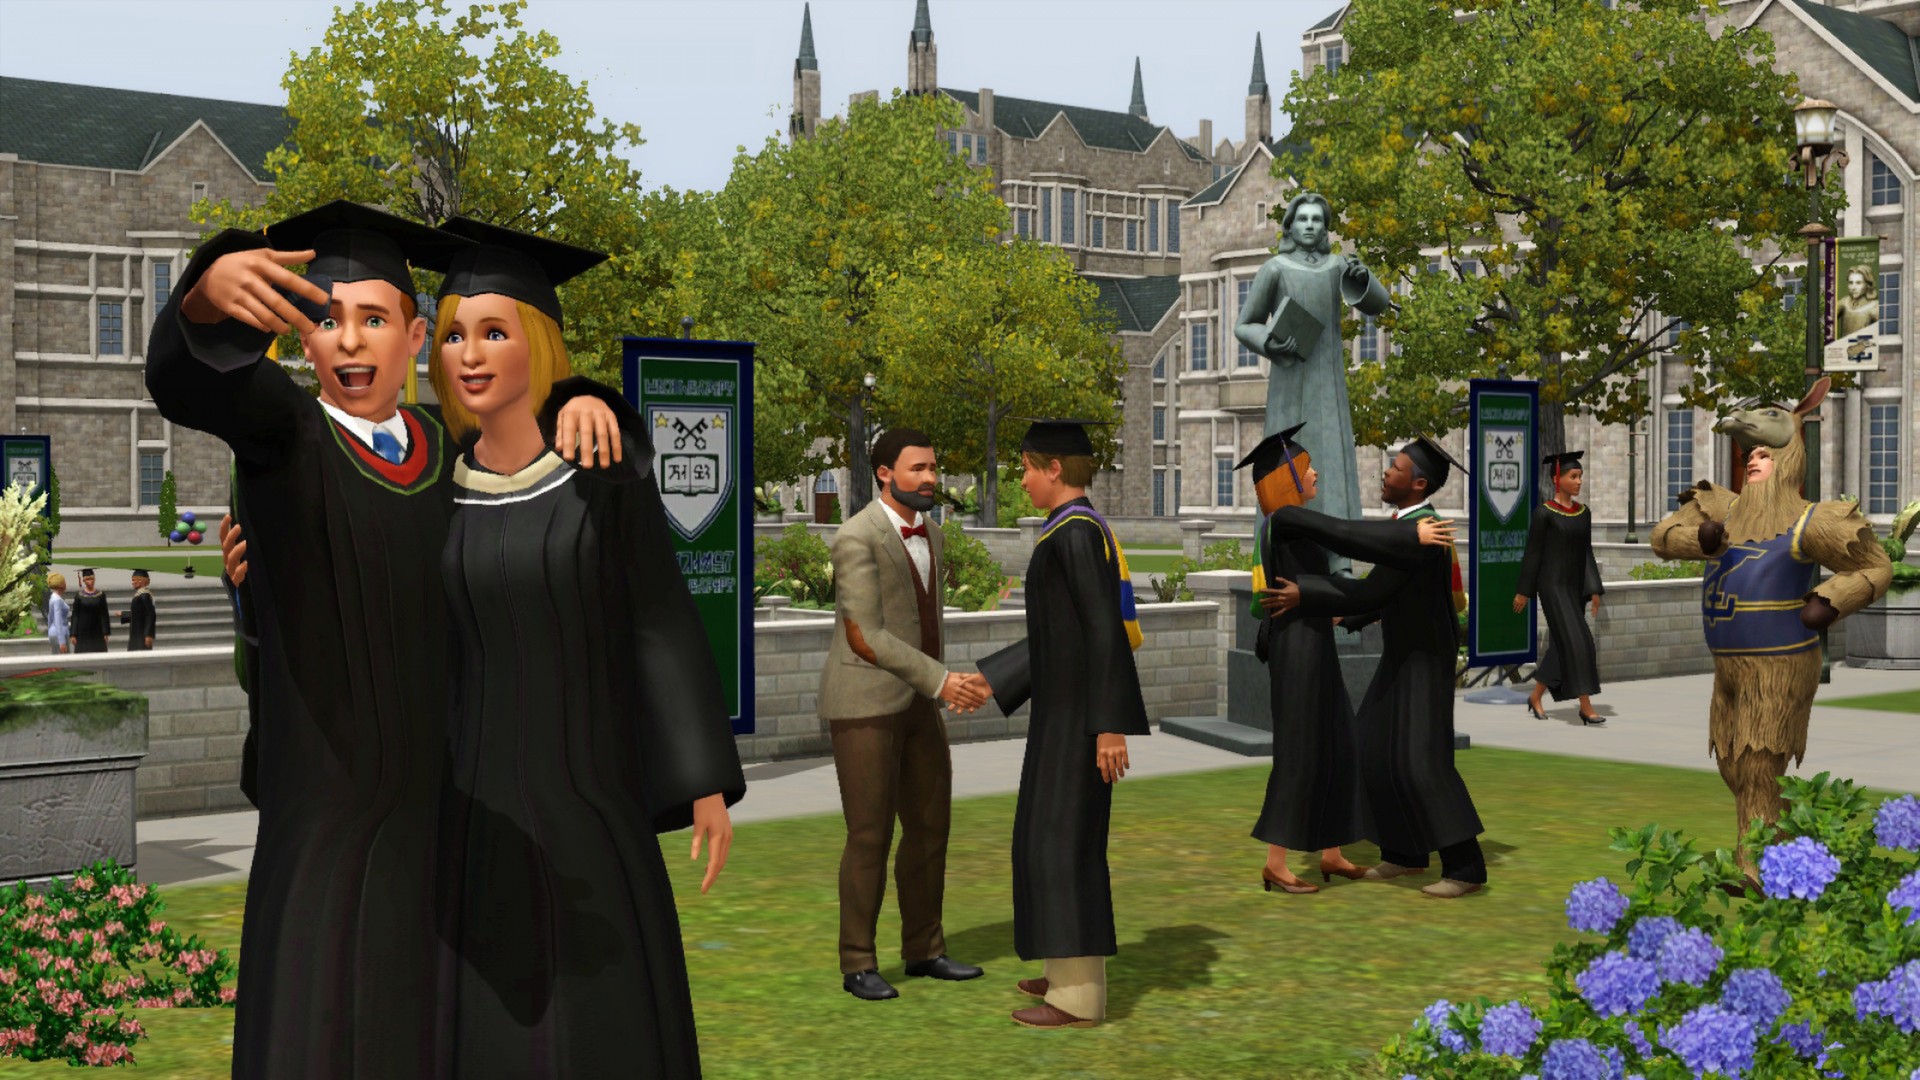 download sims 3 university free for mac